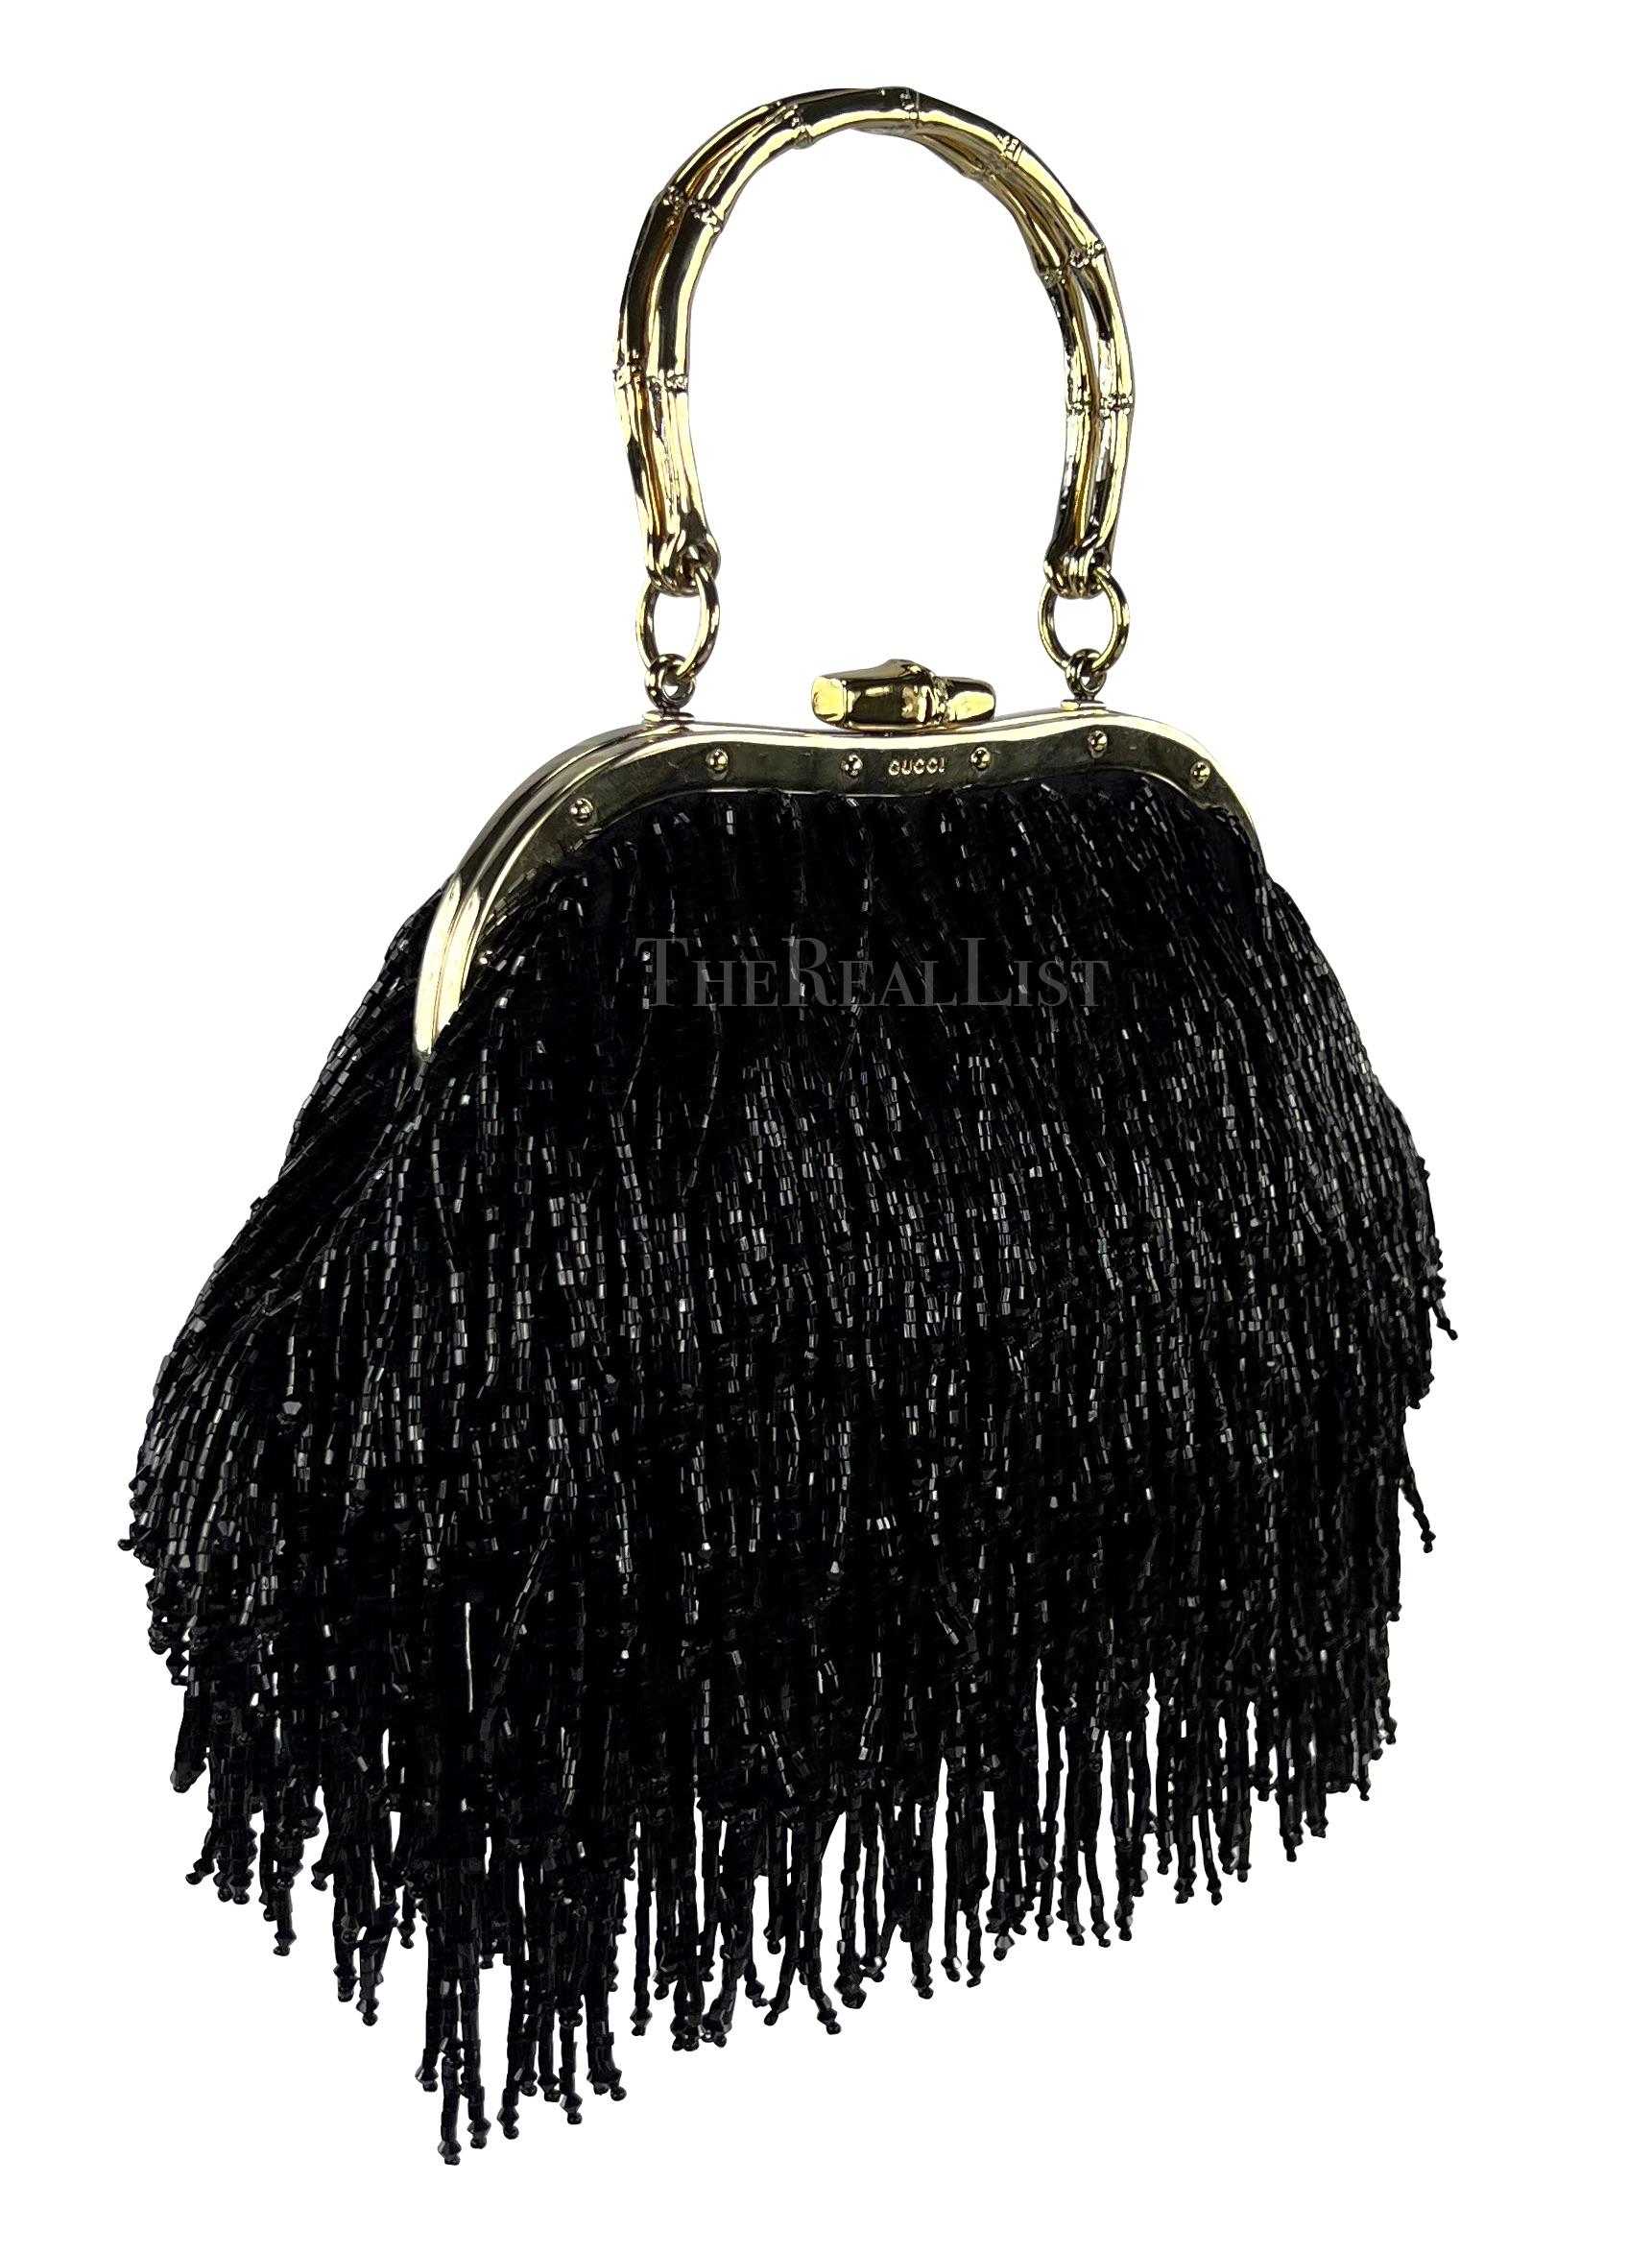 F/W 2004 Gucci by Tom Ford Black Beaded Fringe Bamboo Mini Bag For Sale 5